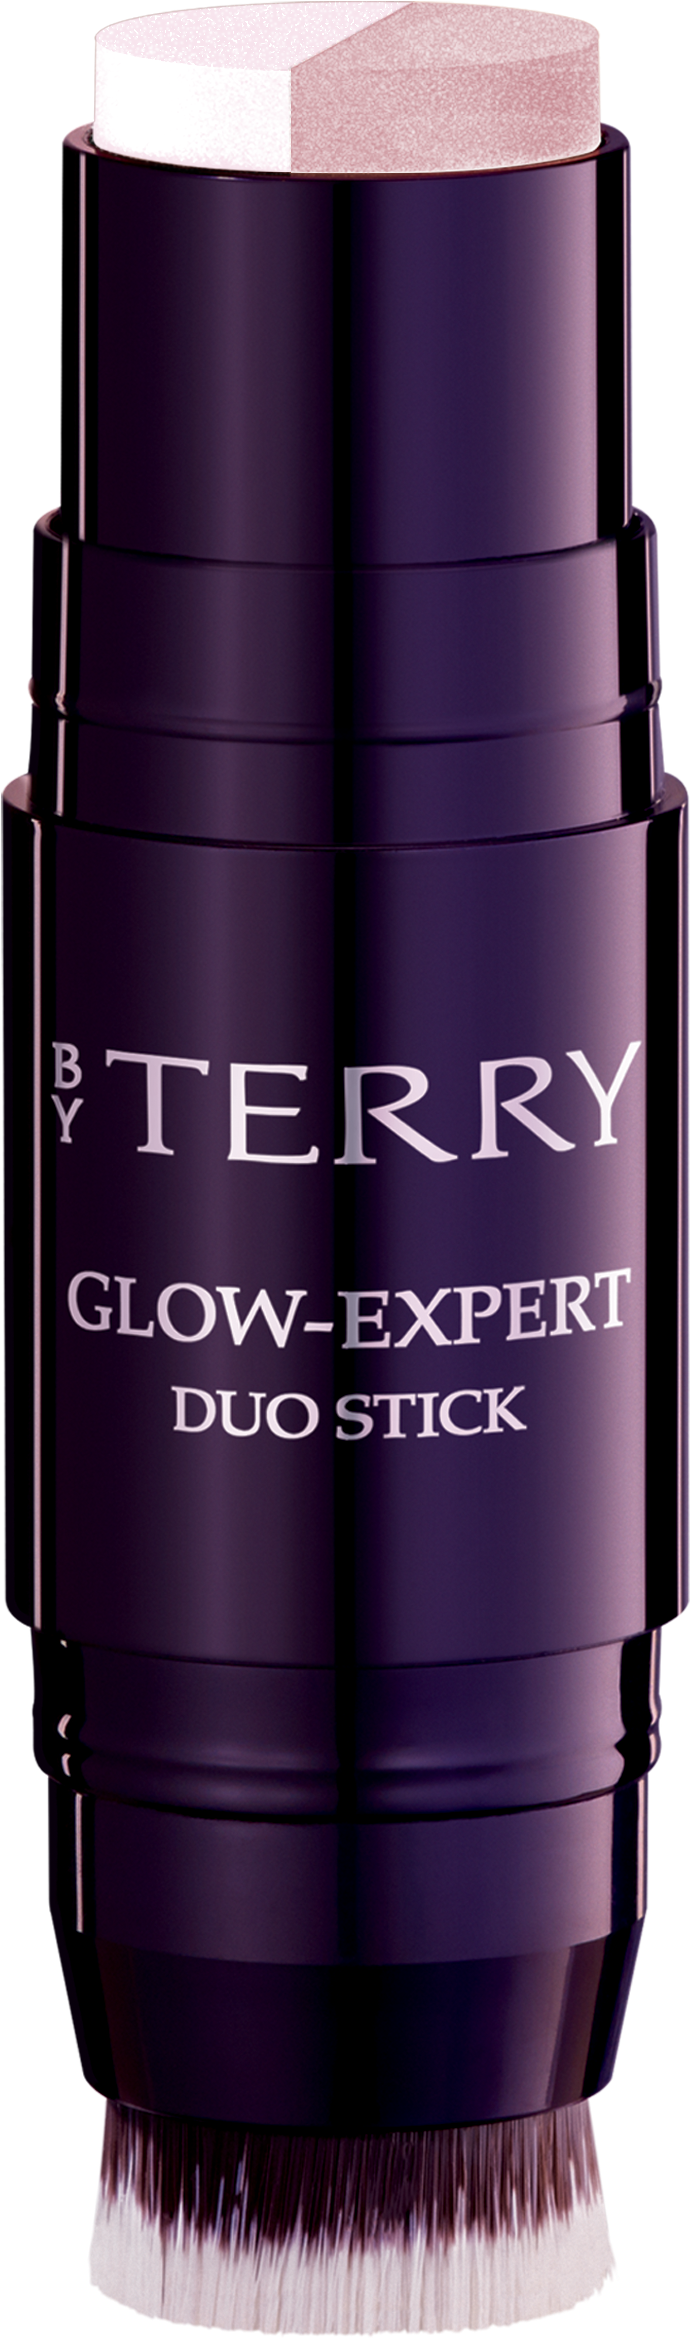 By Terry Glow-Expert Duo Stick. By Terry Glow Expert Duo Stick Copper Coffee. By Terry Glow Expert дуо стик. 3 Peachy Petal by Terry Glow Expert Duo Stick. Стик т